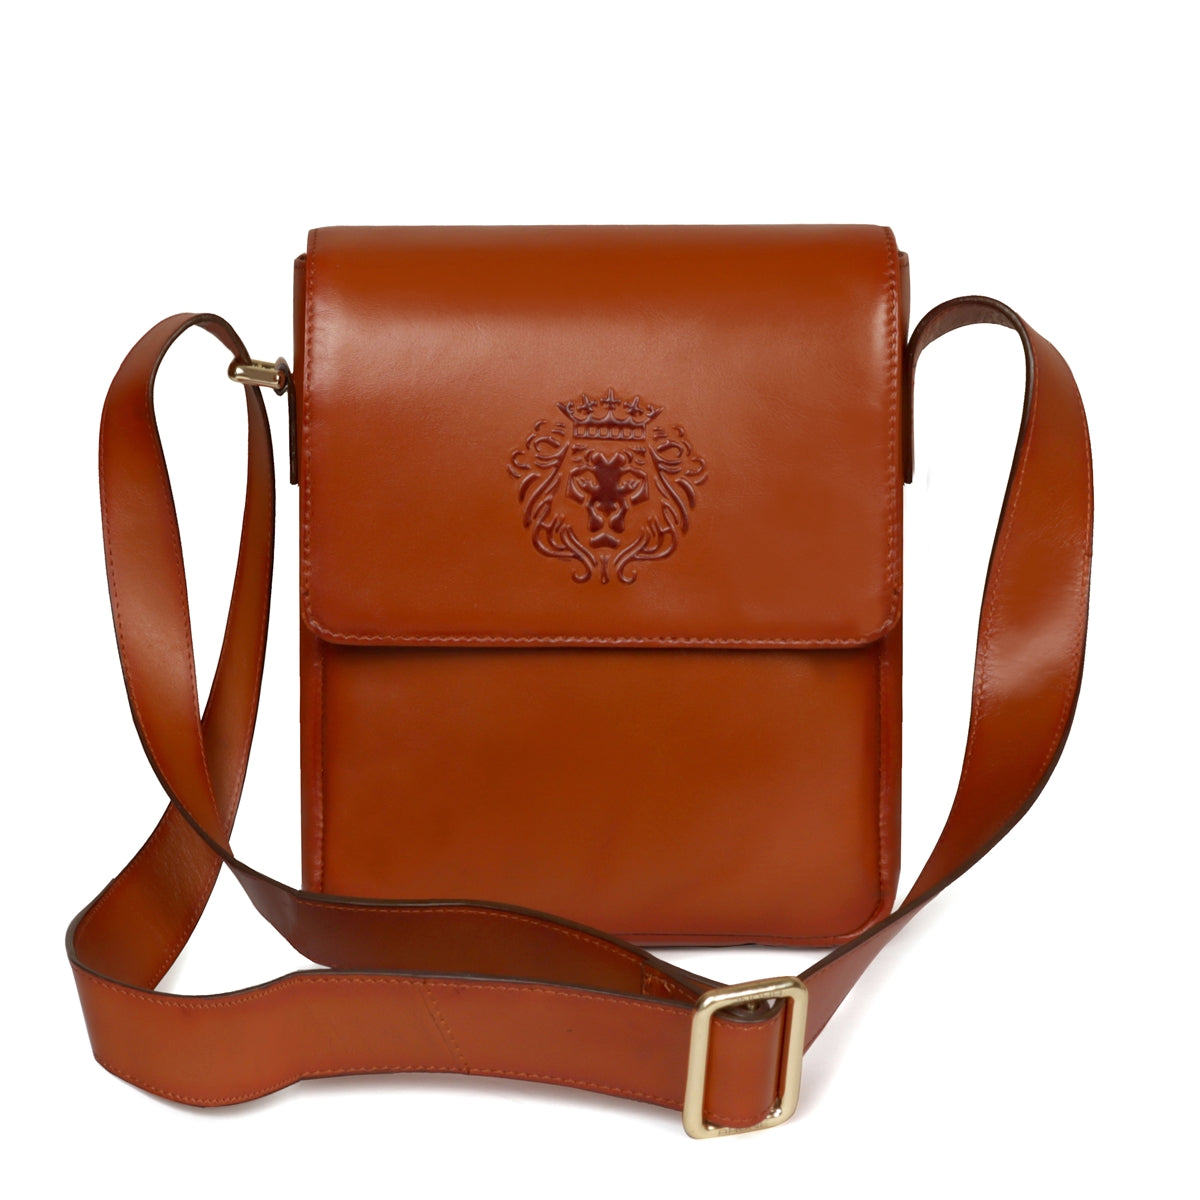 Flap-over Crossbody Bag in Tan Leather with Multi Compartment